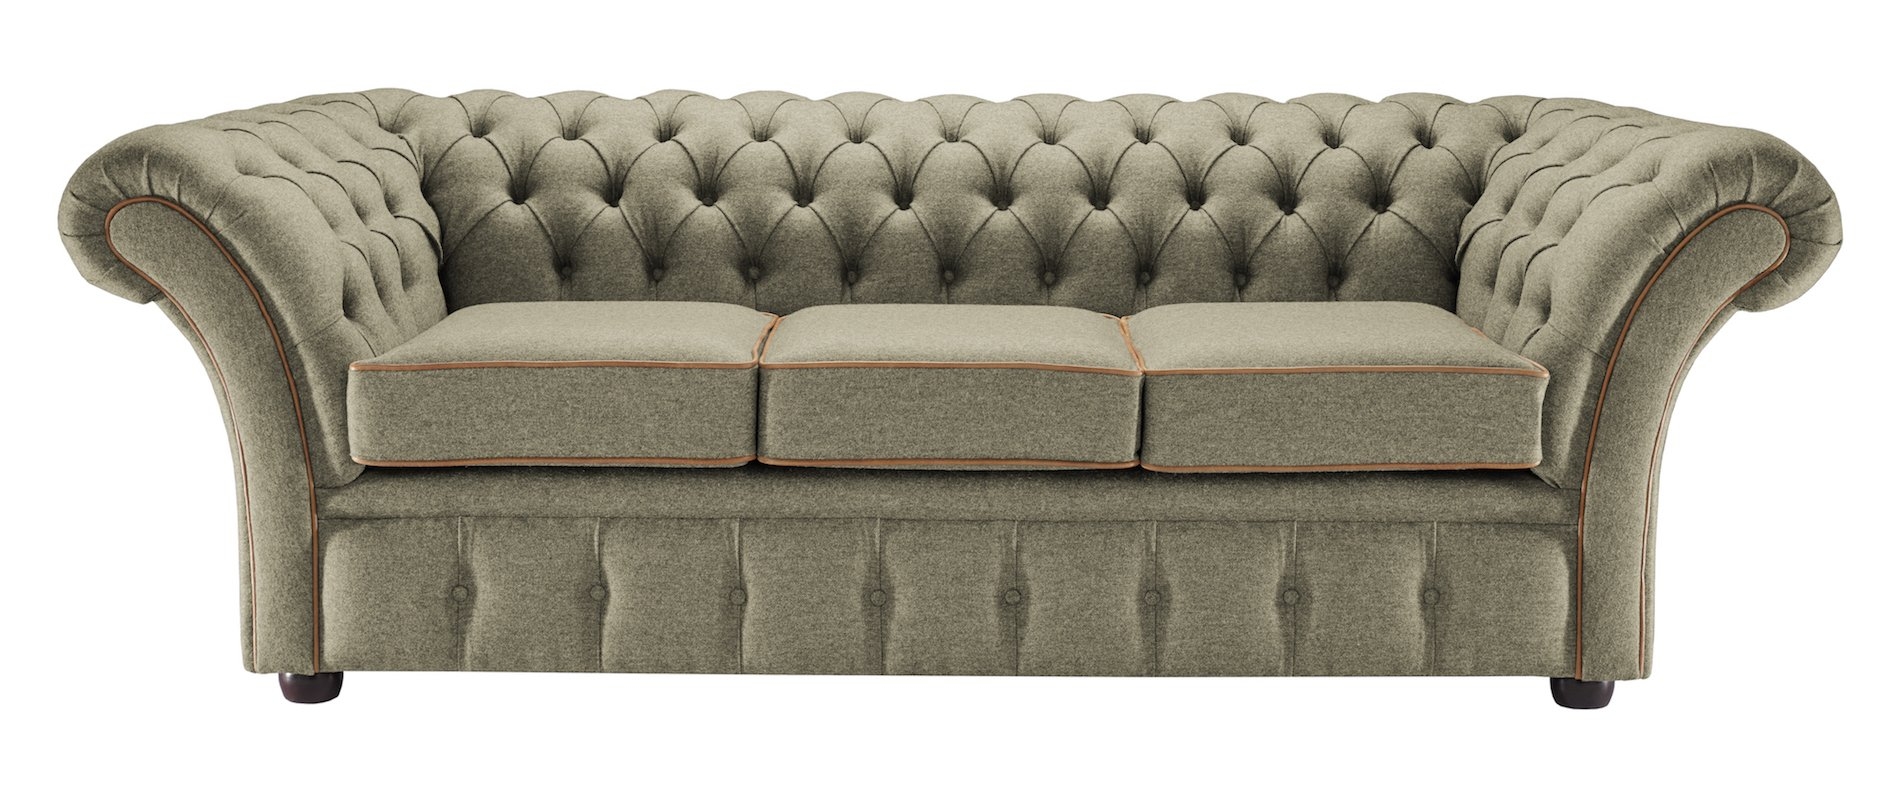 Portabello – Stanhope Chesterfield Sofa – Slate Highland Wool 4 Seater – High Quality Wool – Grey – Chesterfield – 4 Seater 257 X 83 X 88 cm